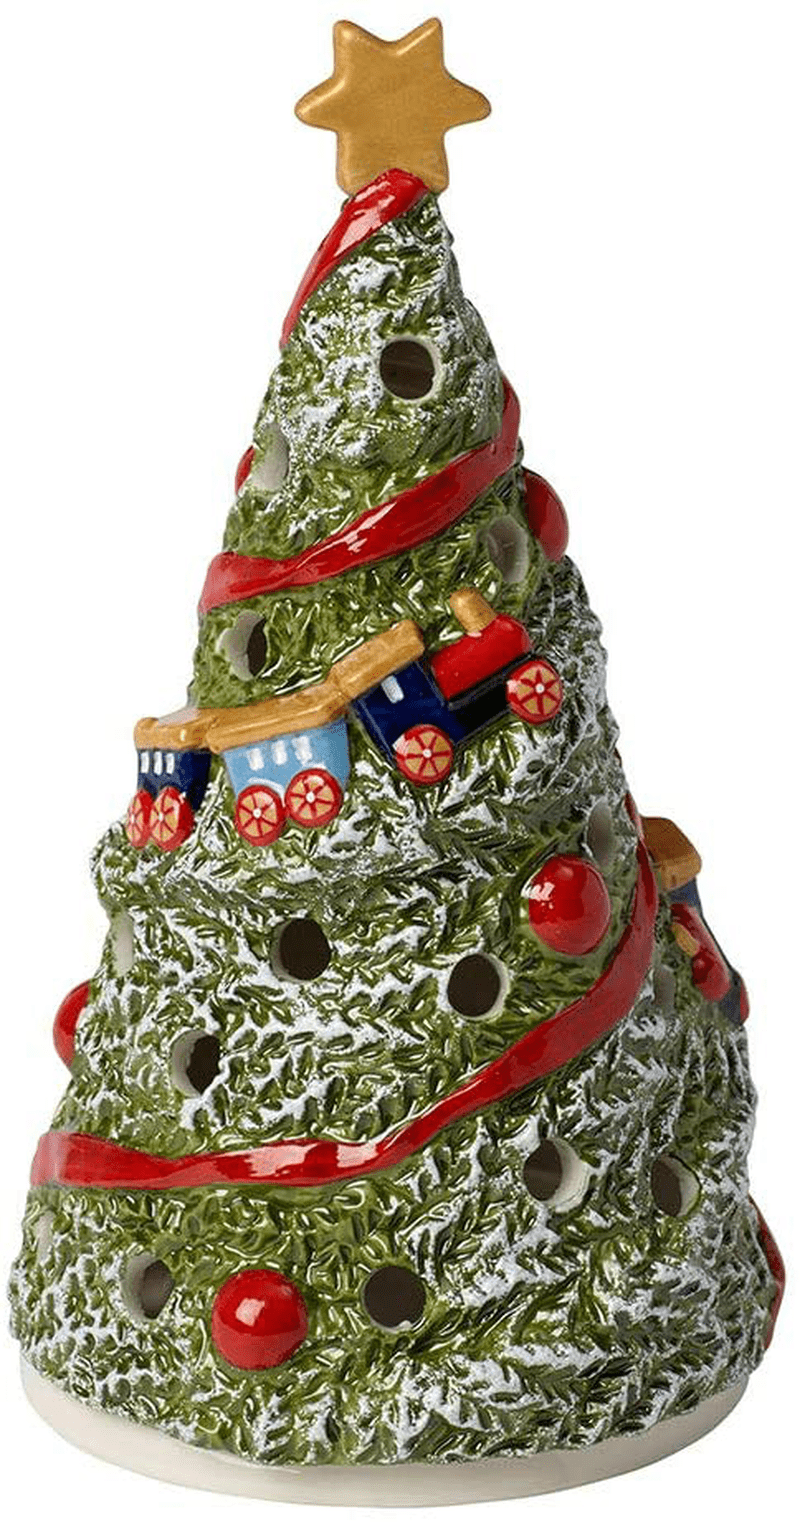 Villeroy & Boch Christmas Toy's Memory Santa on Roof, Multicoloured, 23.5 x 17 x 32 cm, Hard Porcelain, Multi-Colour, One Size, Tealight Home & Garden > Decor > Home Fragrance Accessories > Candle Holders Villeroy & Boch Tree Tealight 